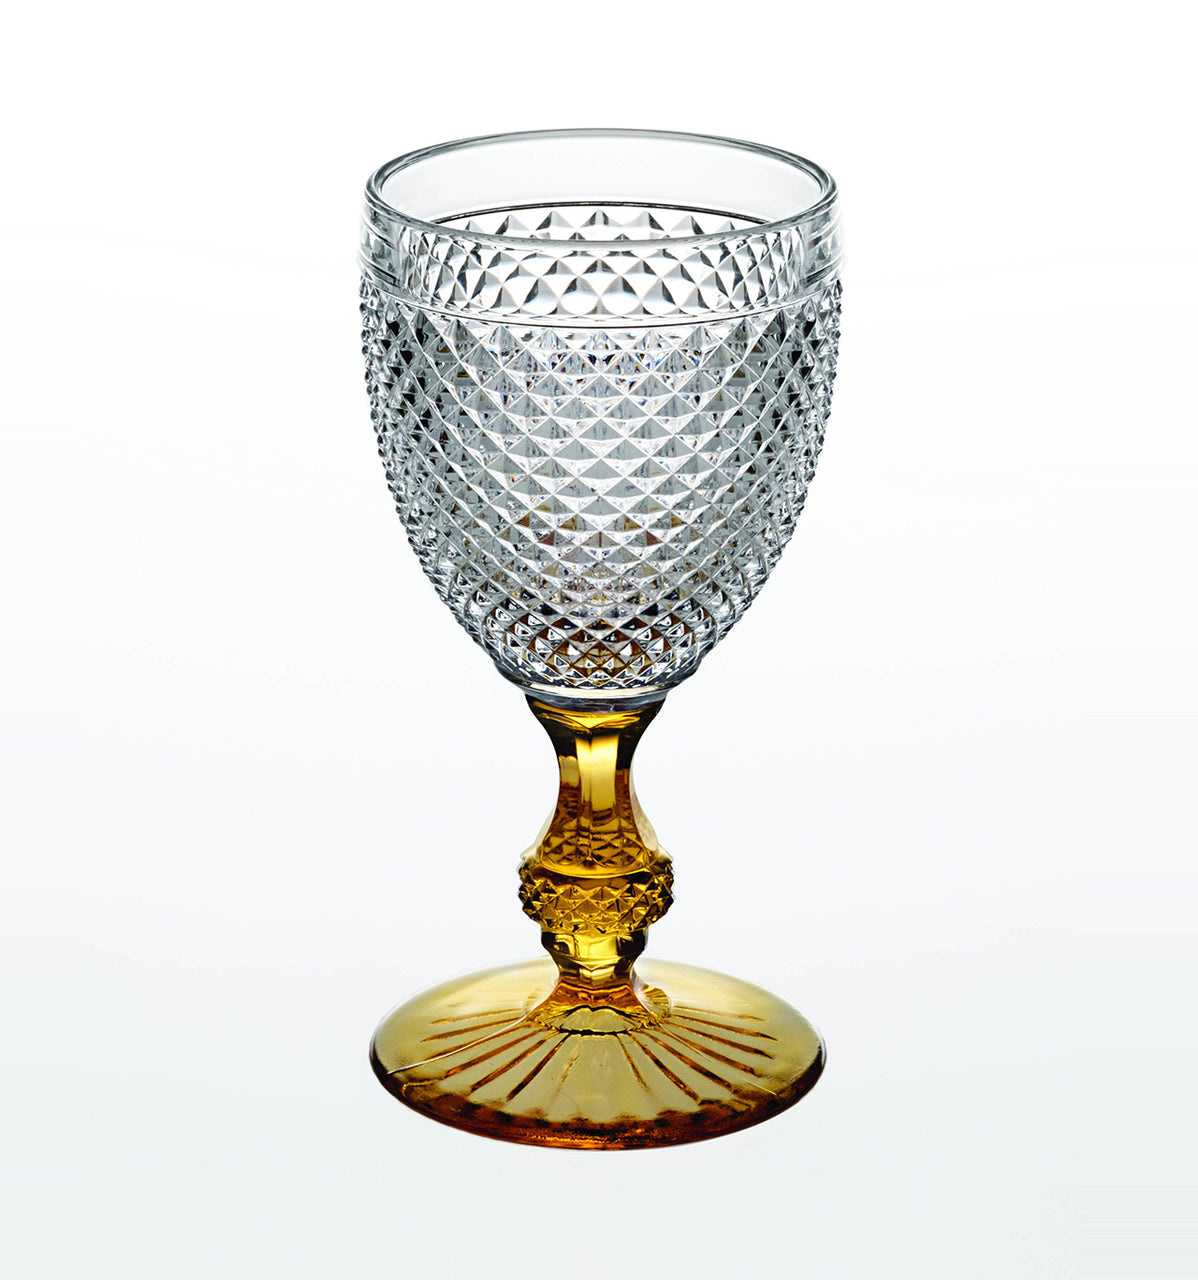 Bicos Goblet Collection (Available In 3 Colors)